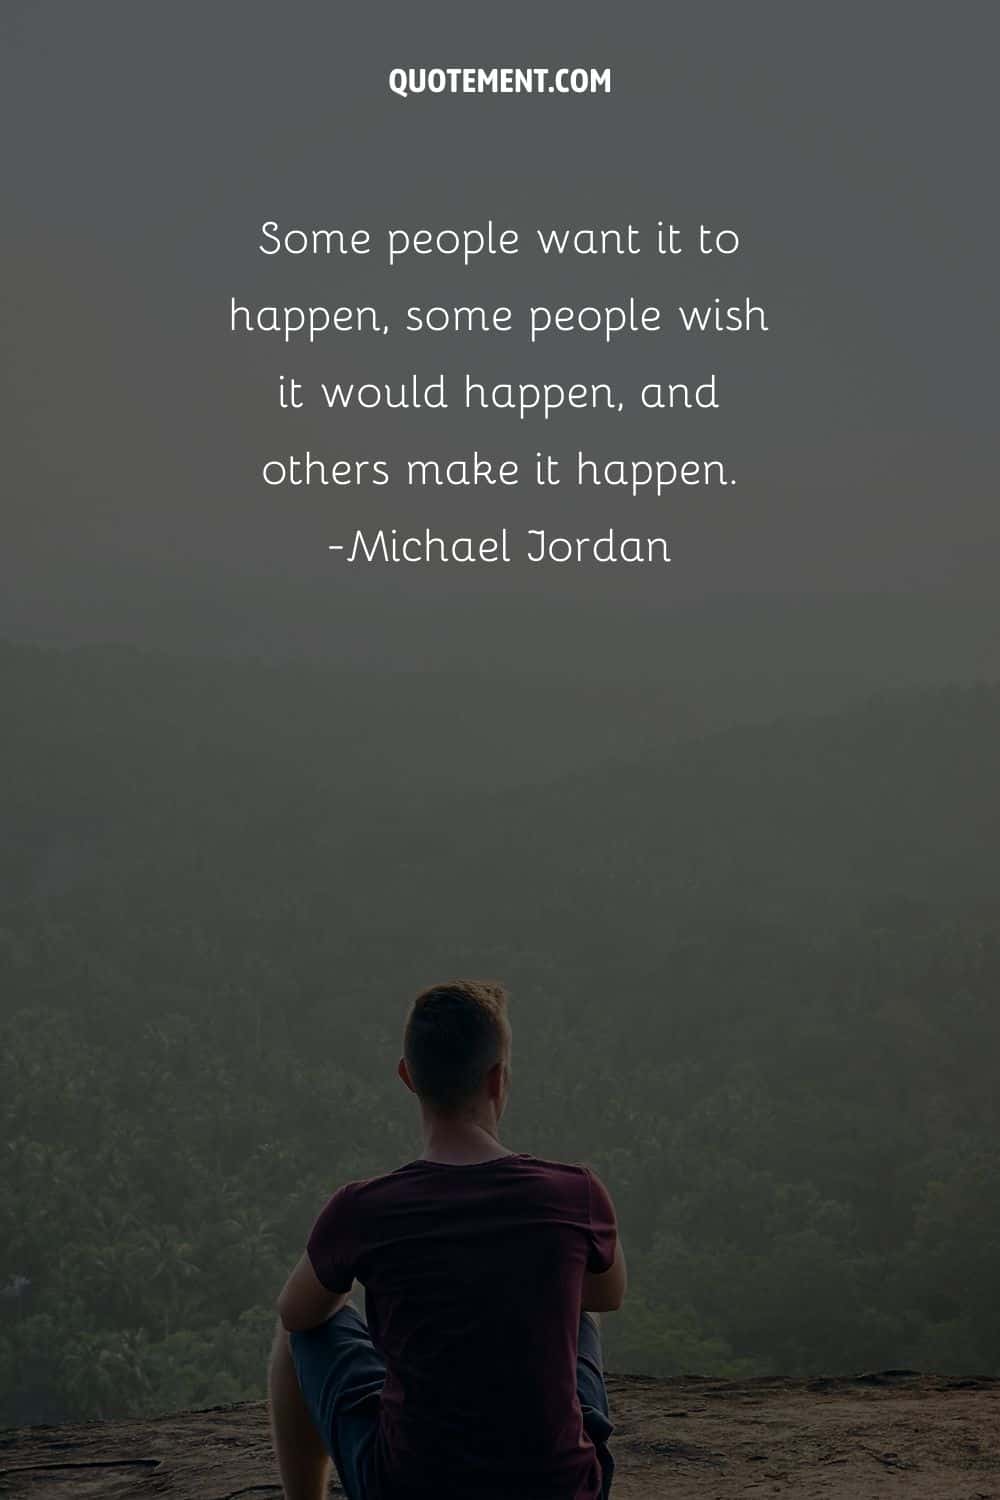 Some people want it to happen, some people wish it would happen, and others make it happen